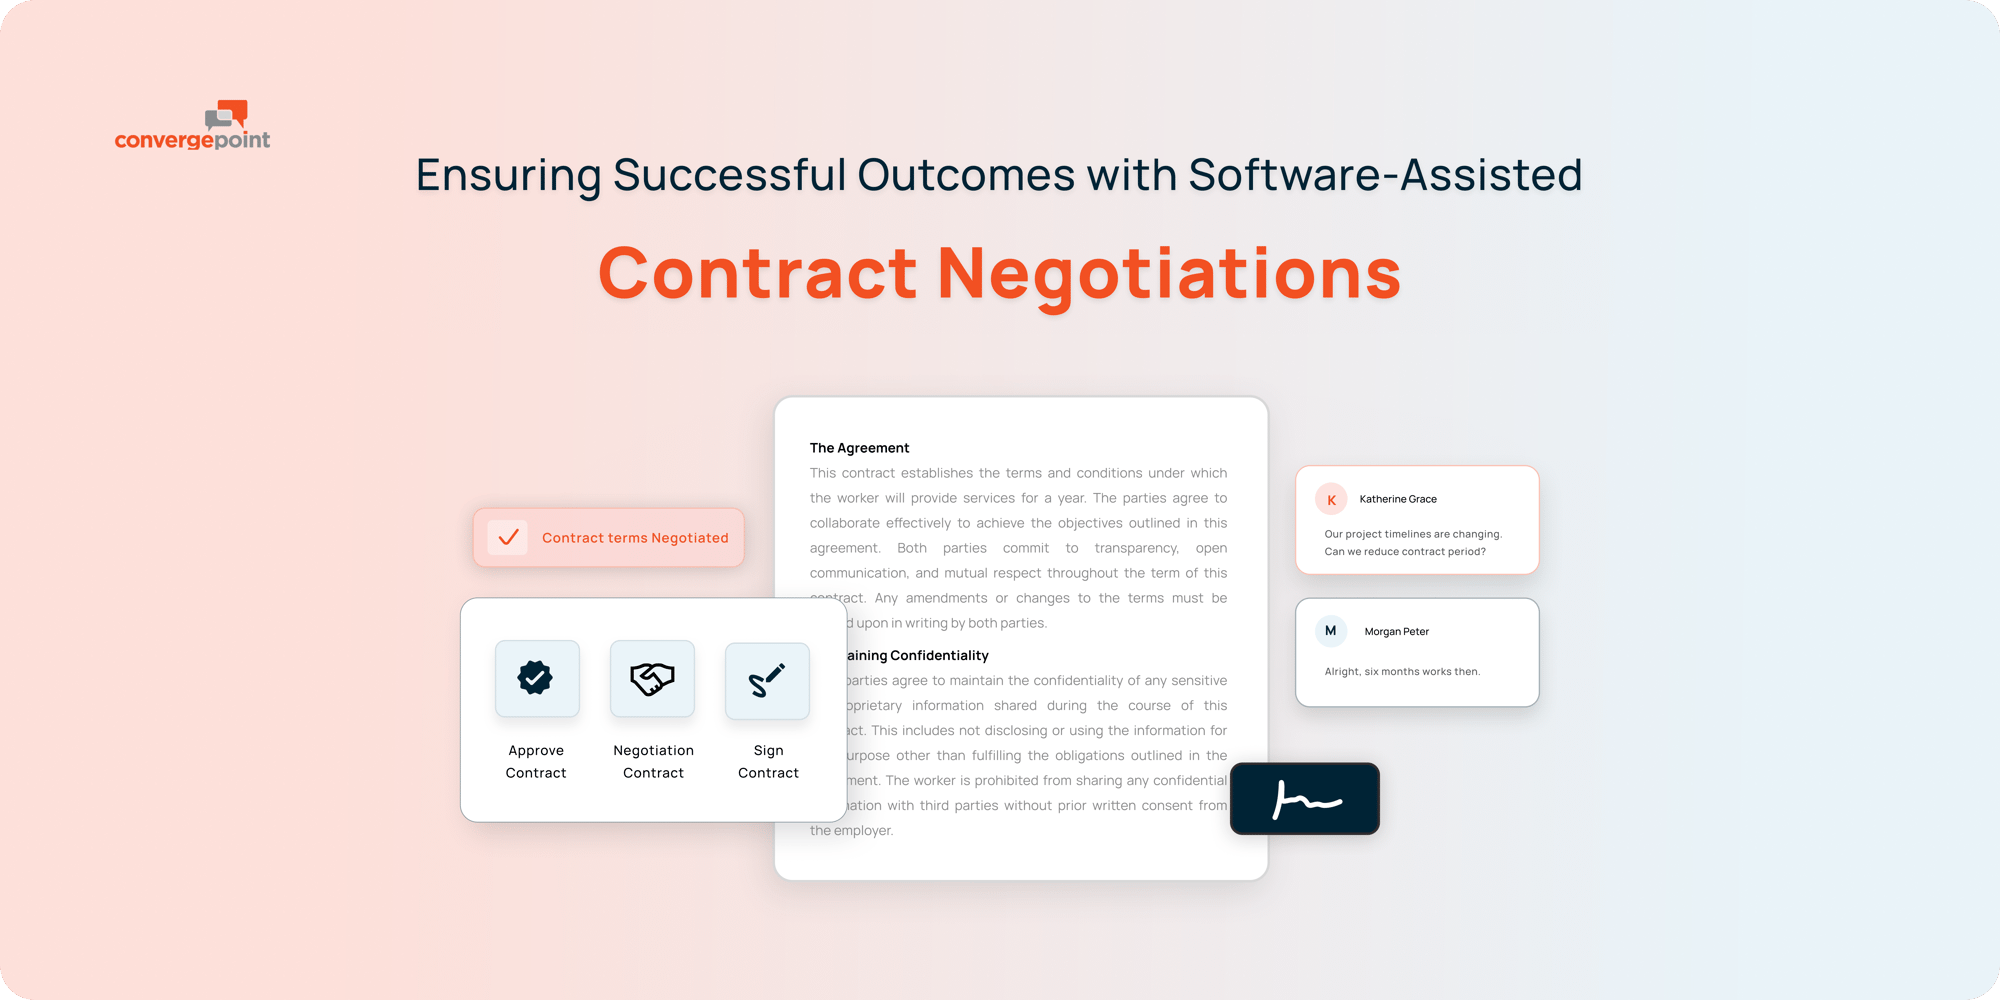 Ensuring Successful Outcomes with Software-Assisted Contract Negotiations